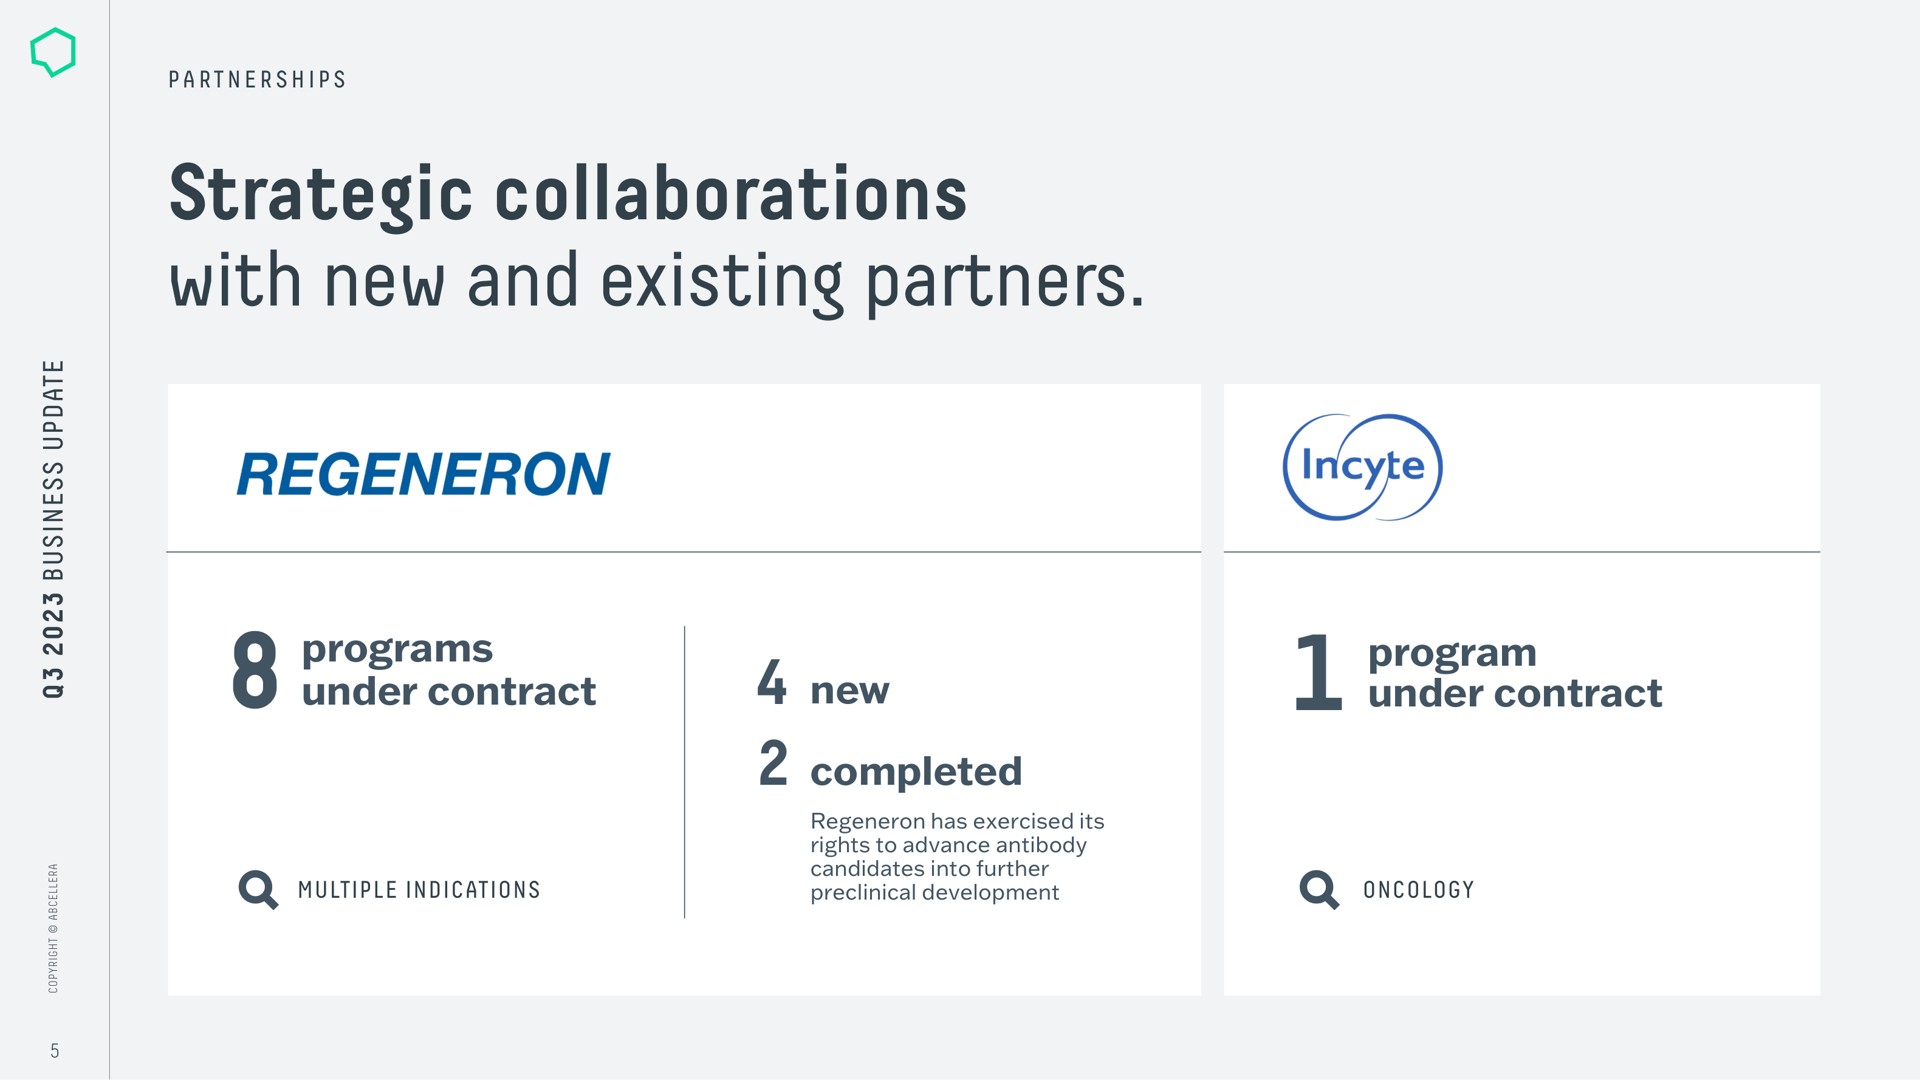 strategic collaborations with new and existing partners programs under contract new completed program under contract | AbCellera